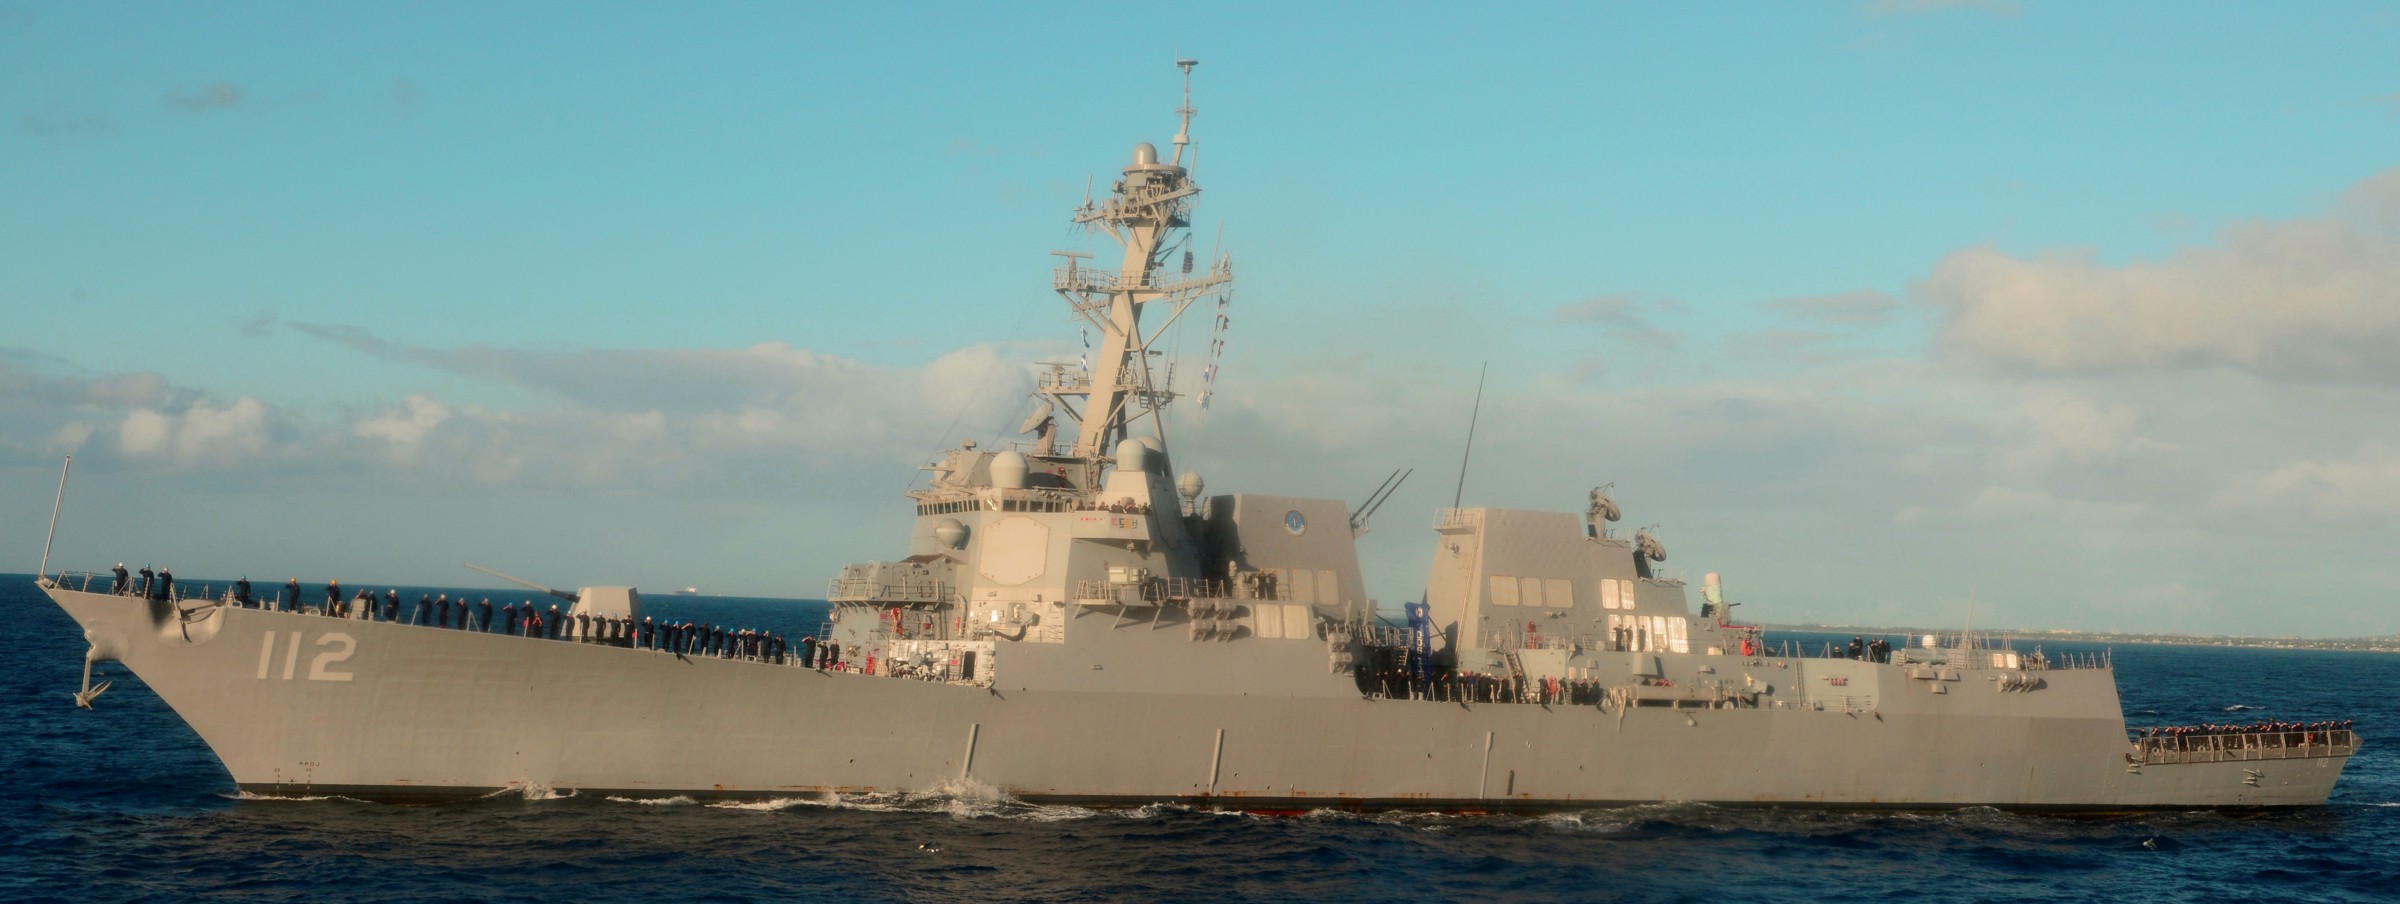 ddg-112 uss michael murphy arleigh burke class guided missile destroyer aegis us navy 34p